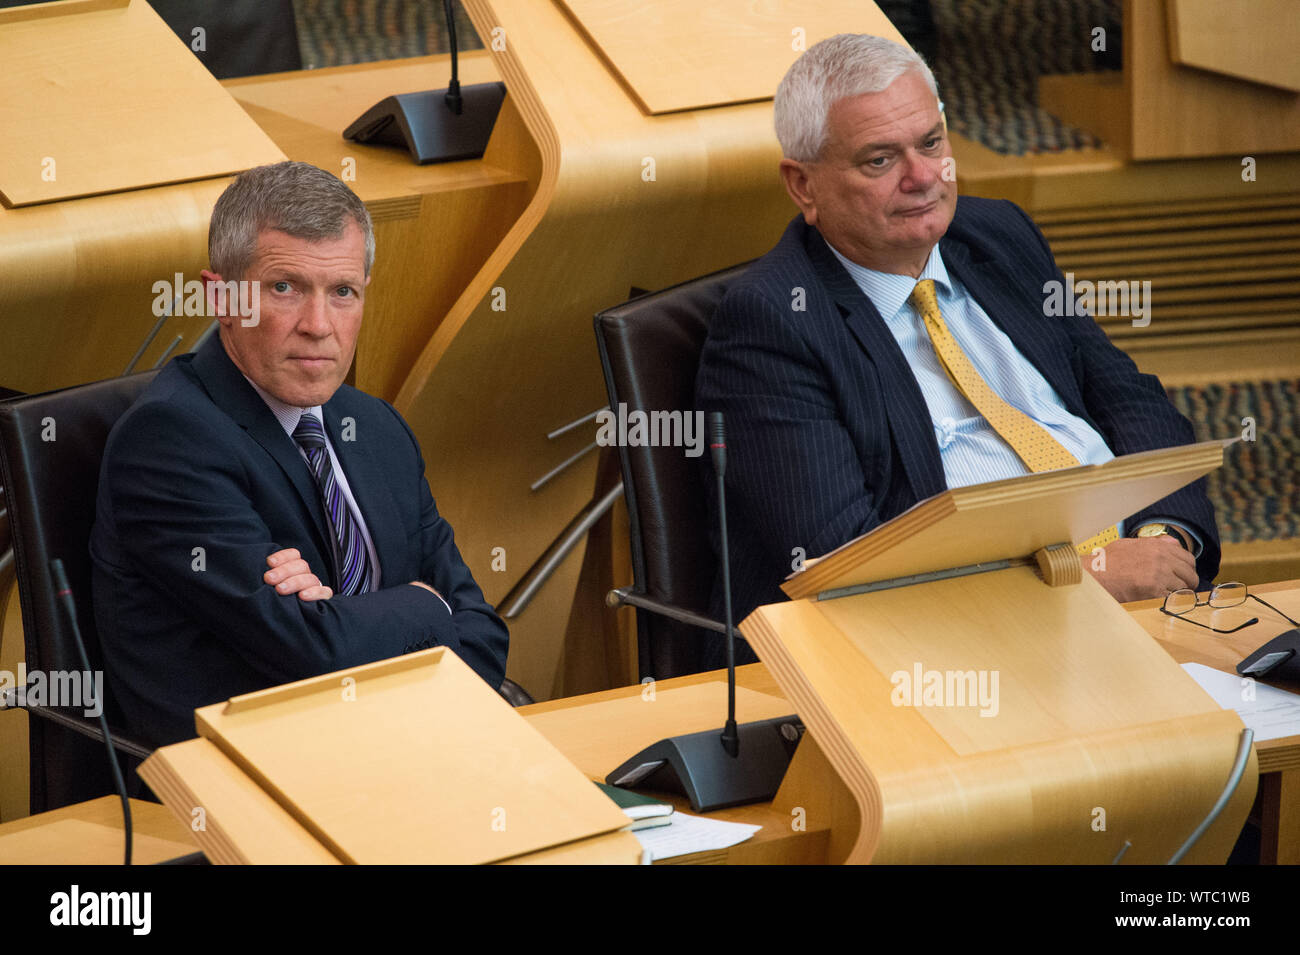 Edinburgh, UK. 5 September 2019. Pictured: (L-R) Willie Rennie MSP - Leader of the Scottish Liberal Democrat Party; Mike Rumbles MSP for North East Scotland. Scottish Government Debate: Avoiding A No Deal Exit From The EU.  That the Parliament agrees that the UK should in no circumstances leave the EU on a no-deal basis, and condemns the Prime Minister’s suspension of the UK Parliament from as early as 9 September until 14 October 2019. The result of the division is: For 87, Against 28, Abstentions 0. Colin Fisher/CDFIMAGES.COM Stock Photo